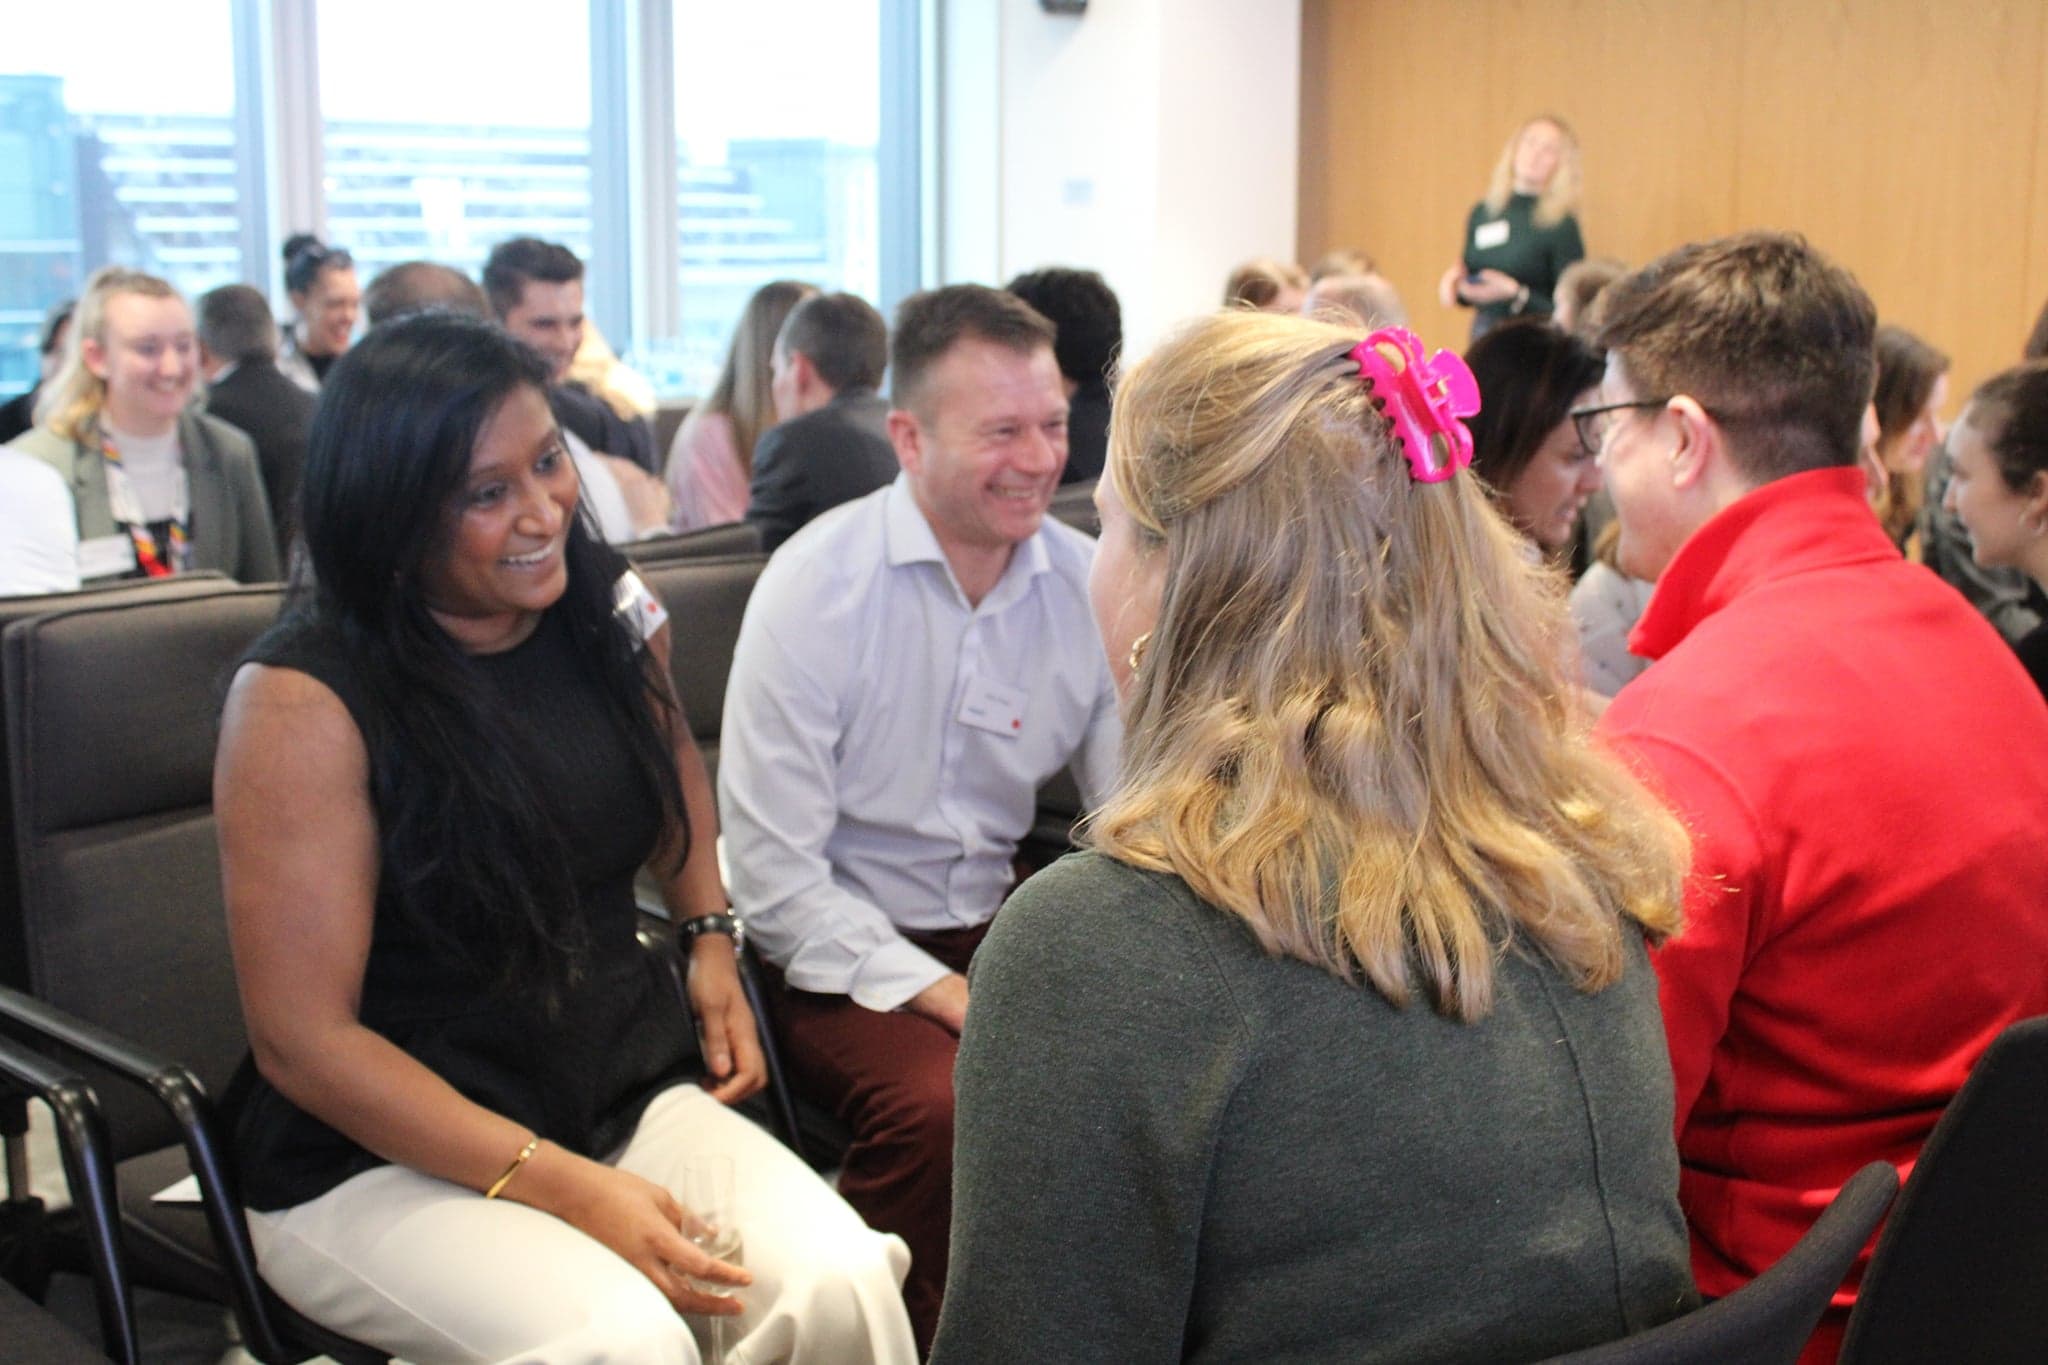 Two colleagues laughing together during the speed networking event